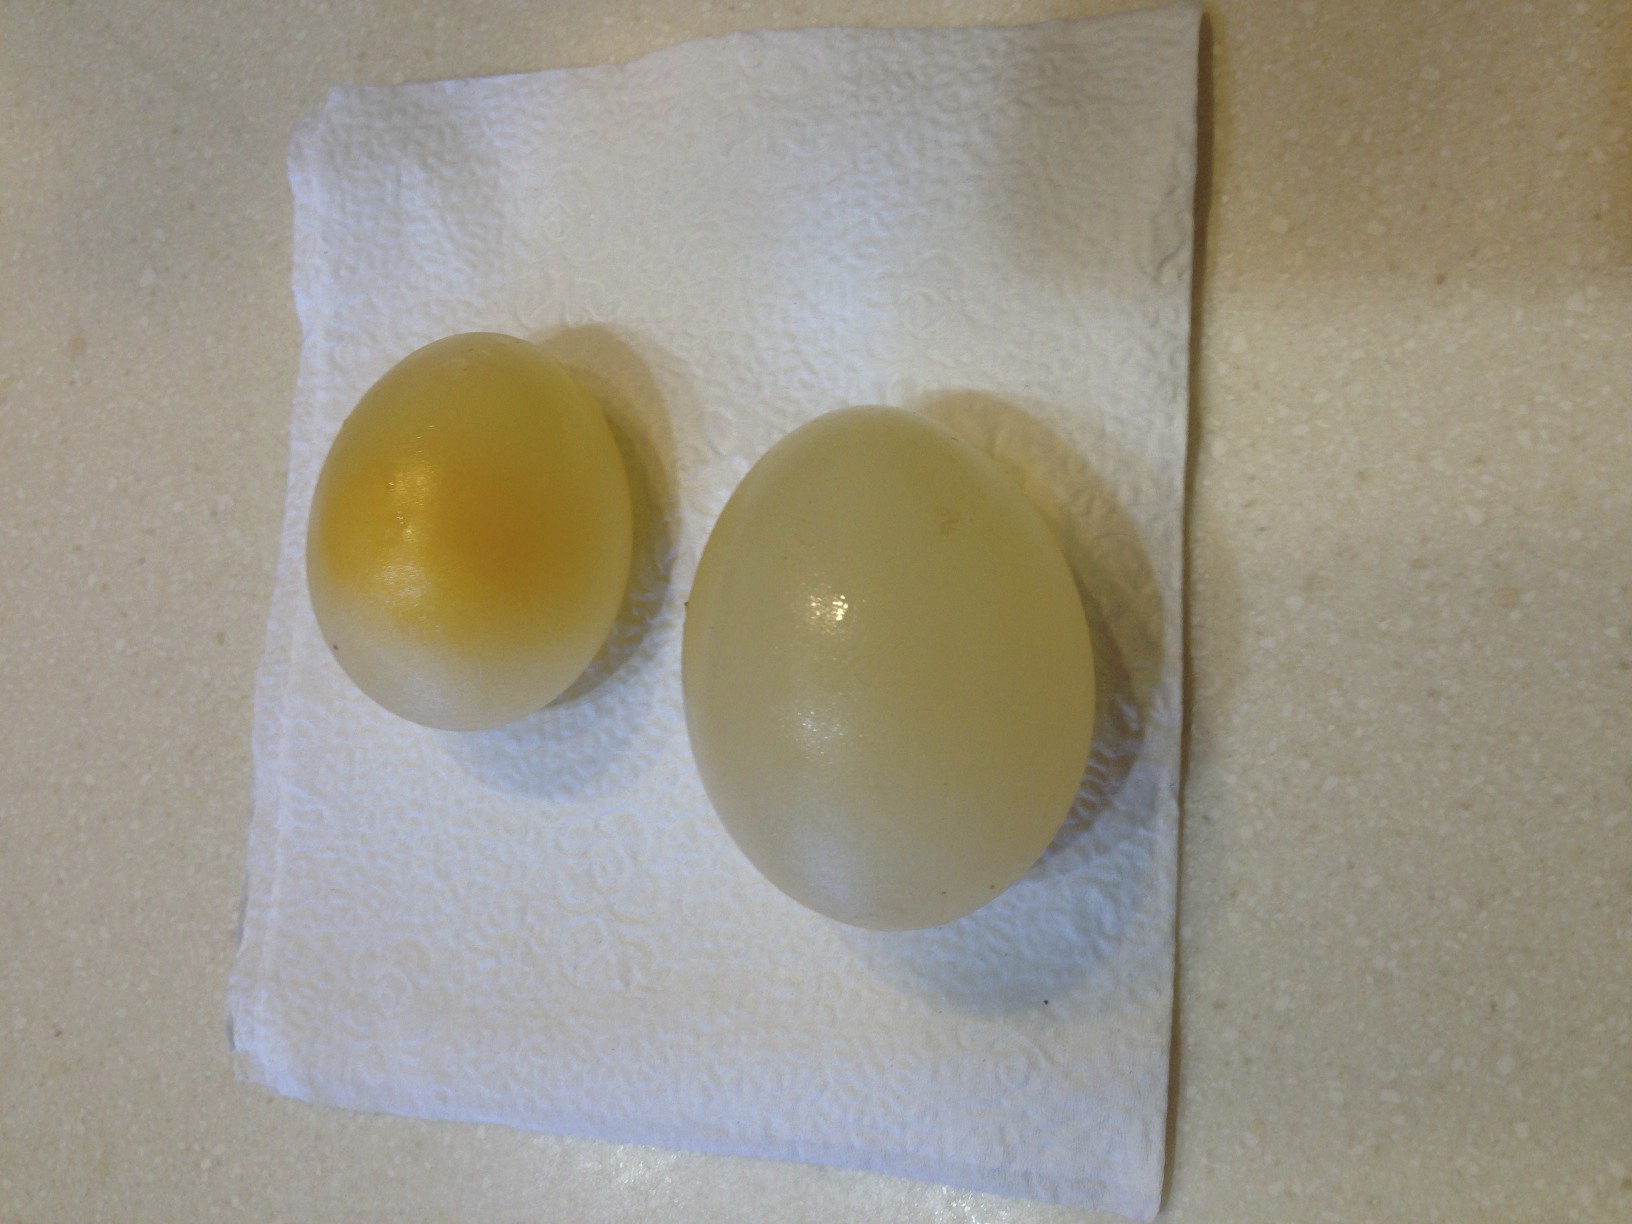 The second lab we did involved chicken eggs. 